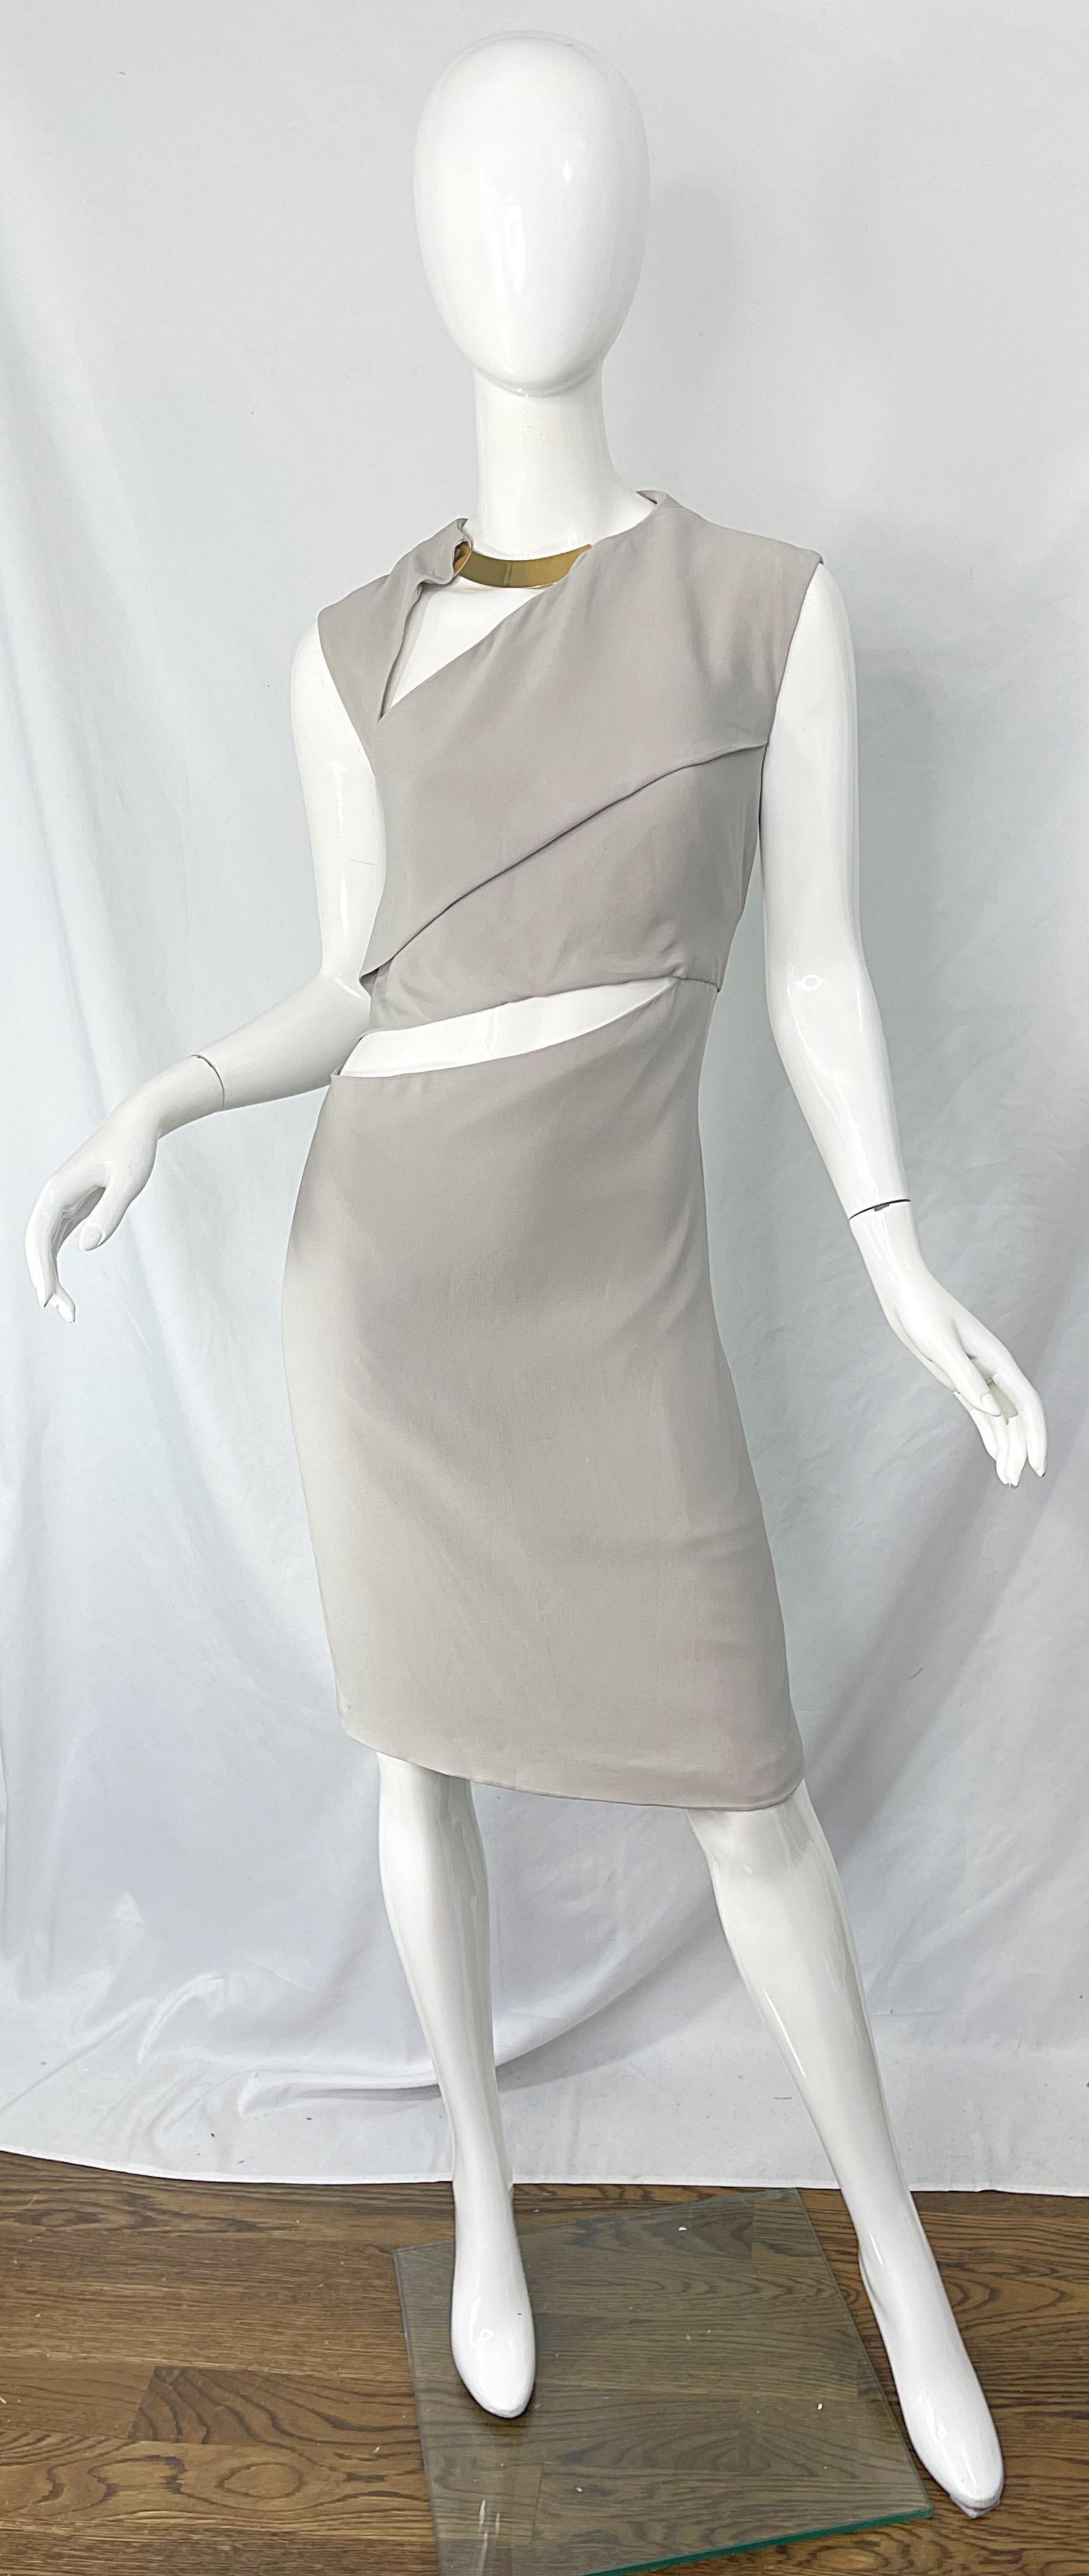 Gucci Fall 2010 Runway Size 48 / US 12 Khaki Nude Tan Gold Cut Out Silk Dress  For Sale 5